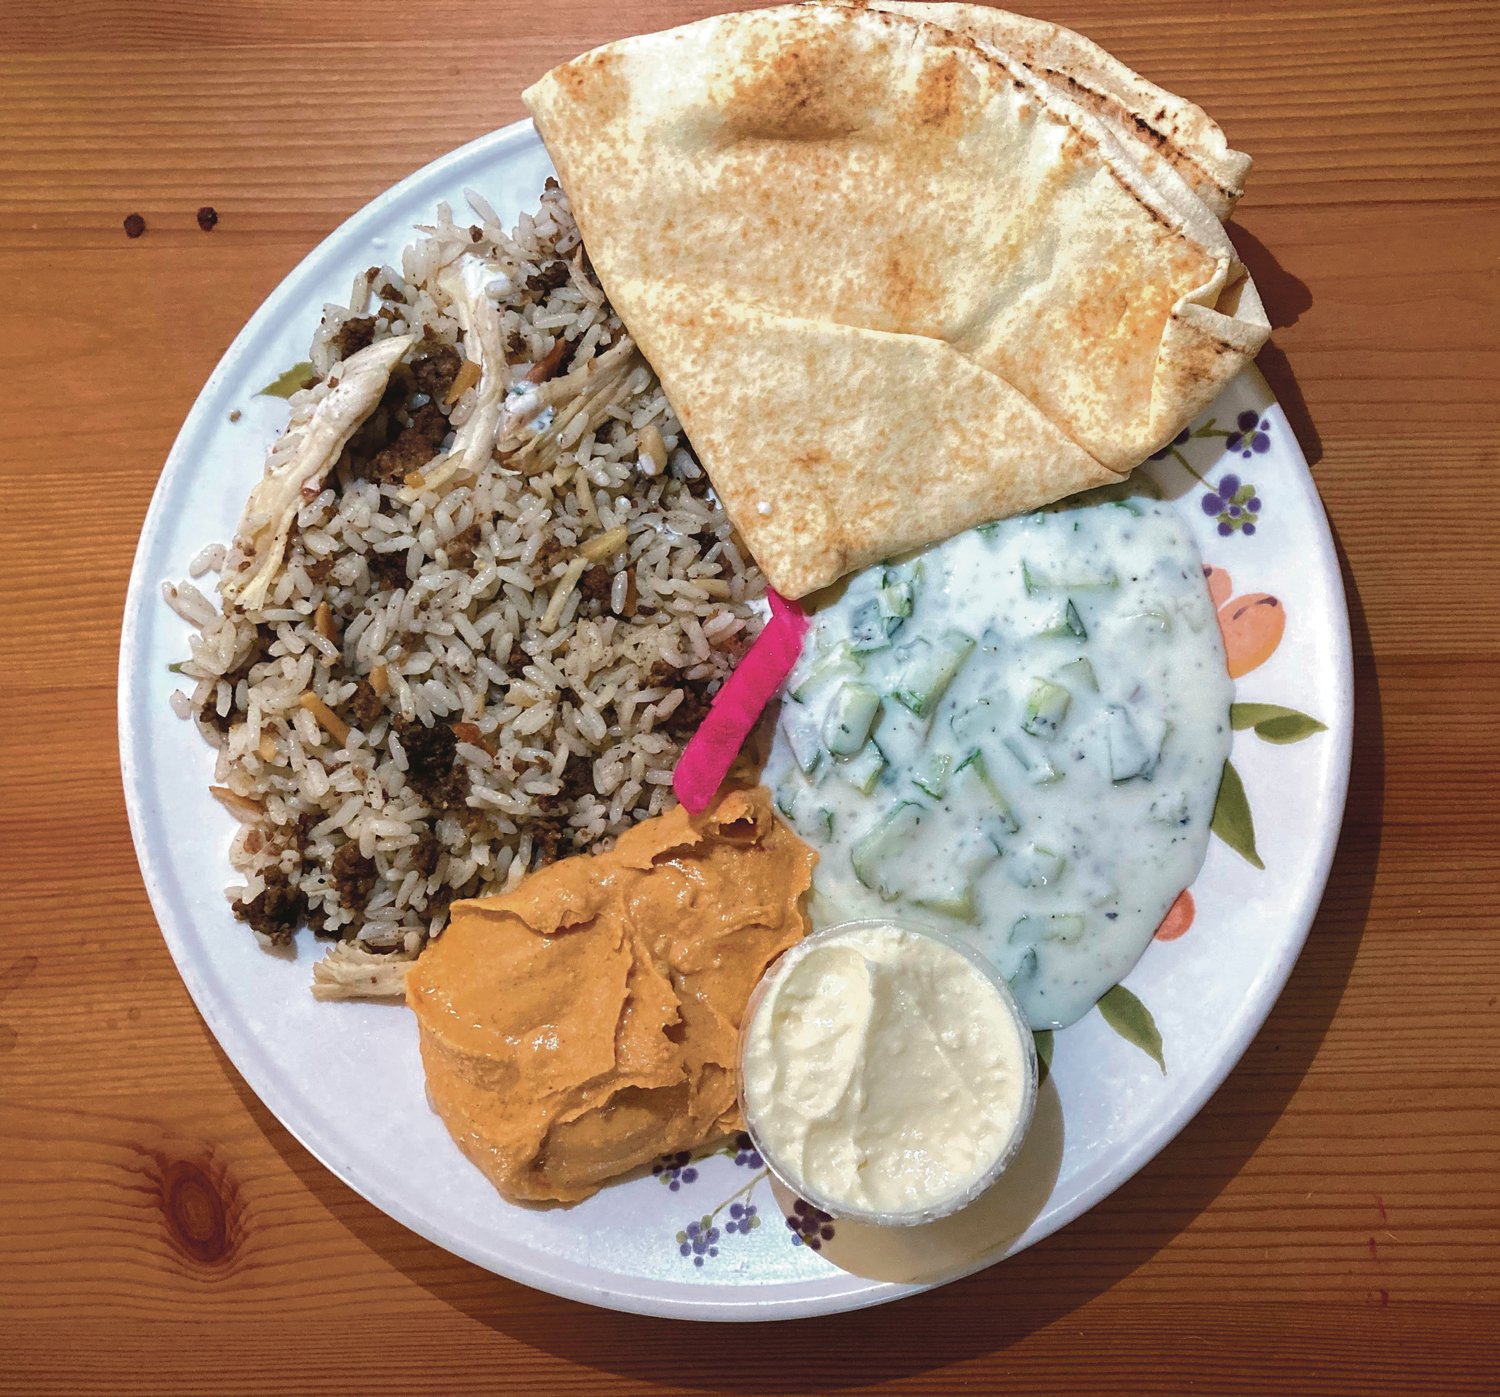 Hashwi Combo is a sizable meal that will leave you with leftovers, but you might want to order extra garlic sauce.